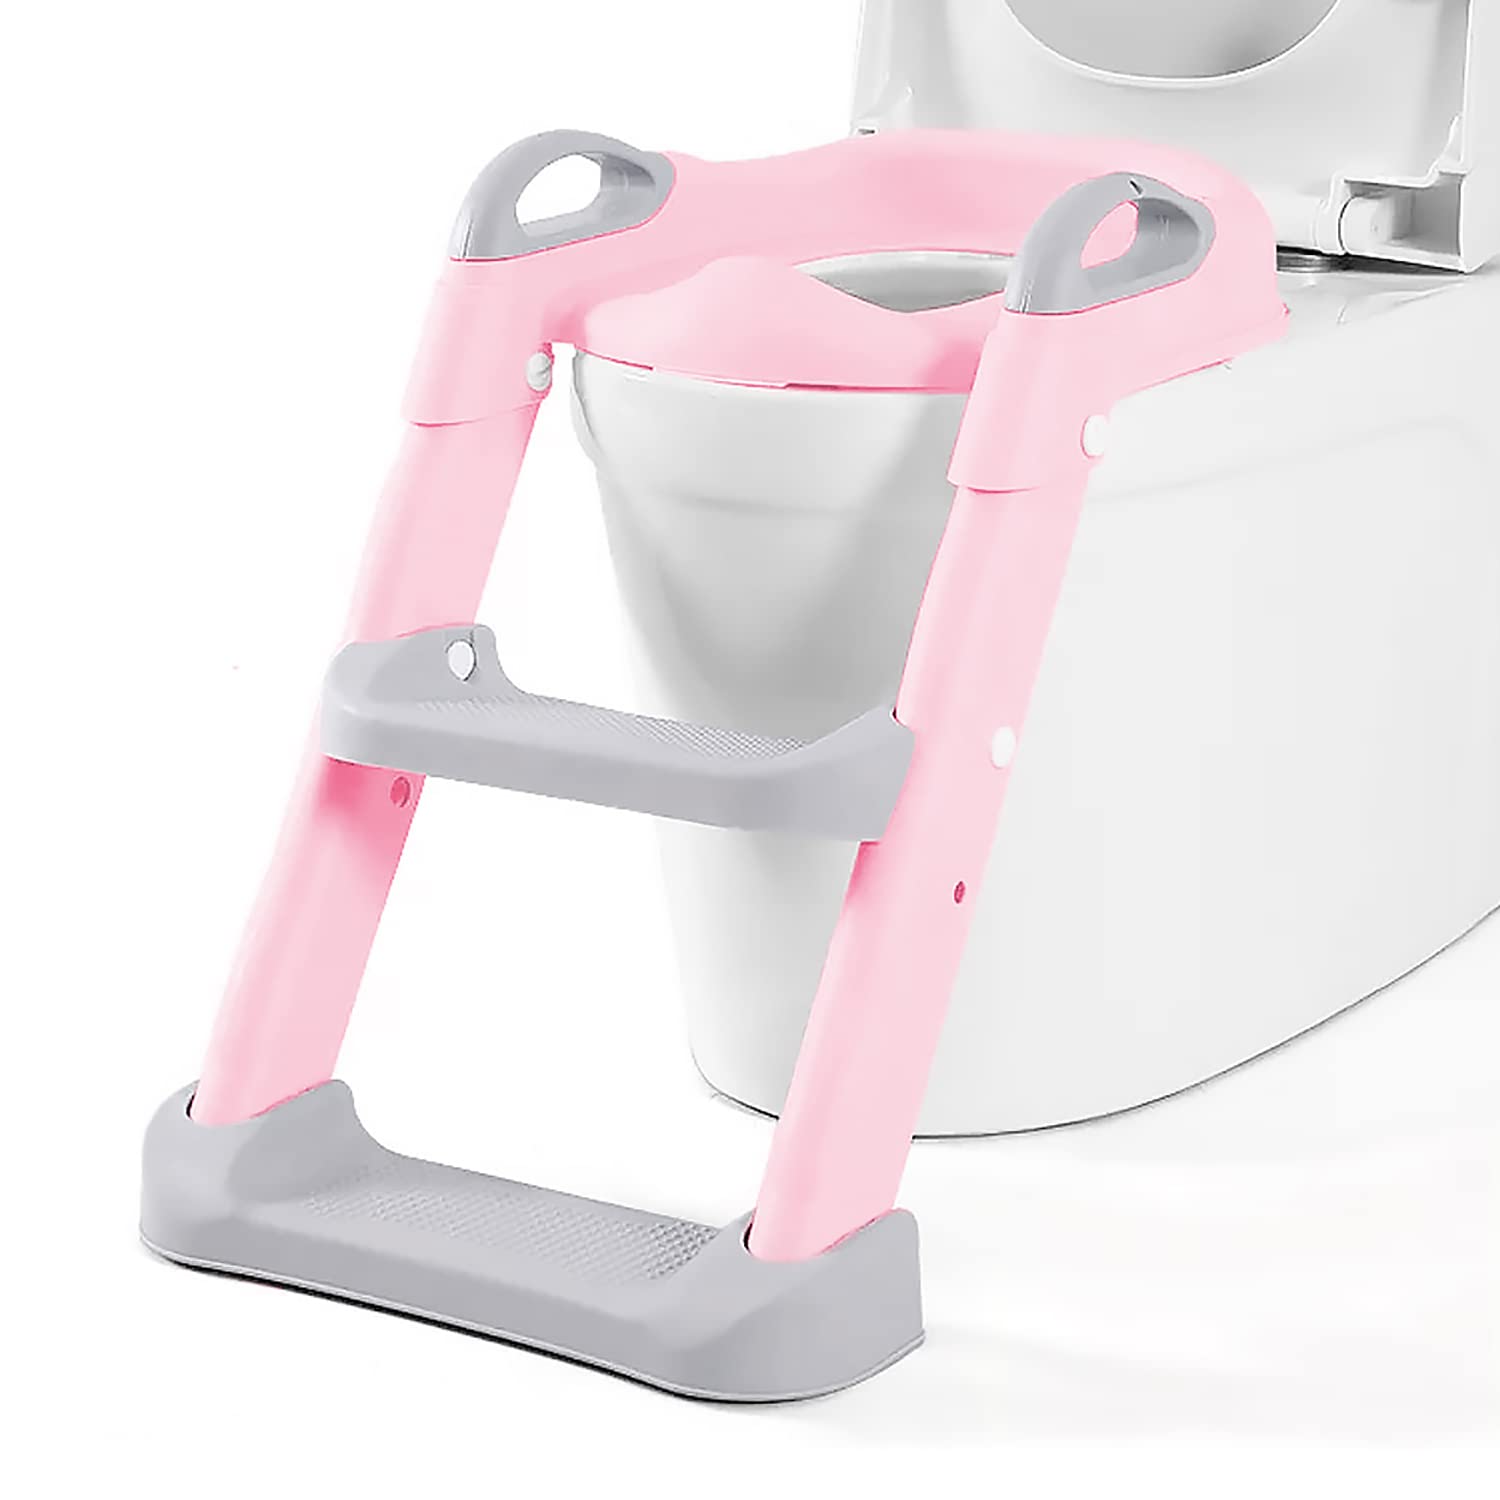 baby step toilet trainer Toilet potty step ladder trainer baby kids training seat toddler slip exercise safety non folding